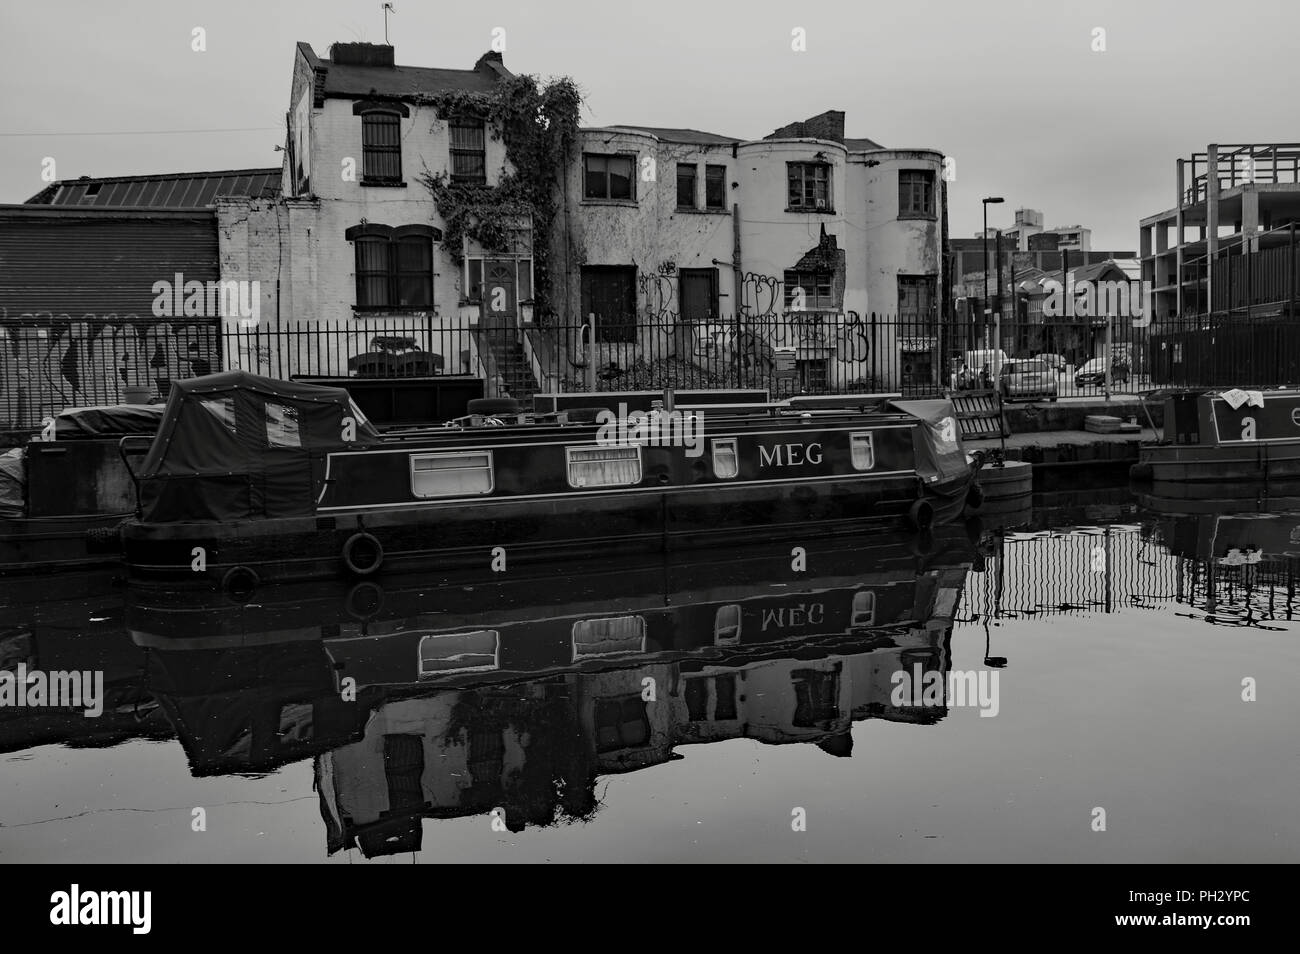 Canal boat moored on Regents canal in Haggerston area of London nearby Bethnal Green Stock Photo